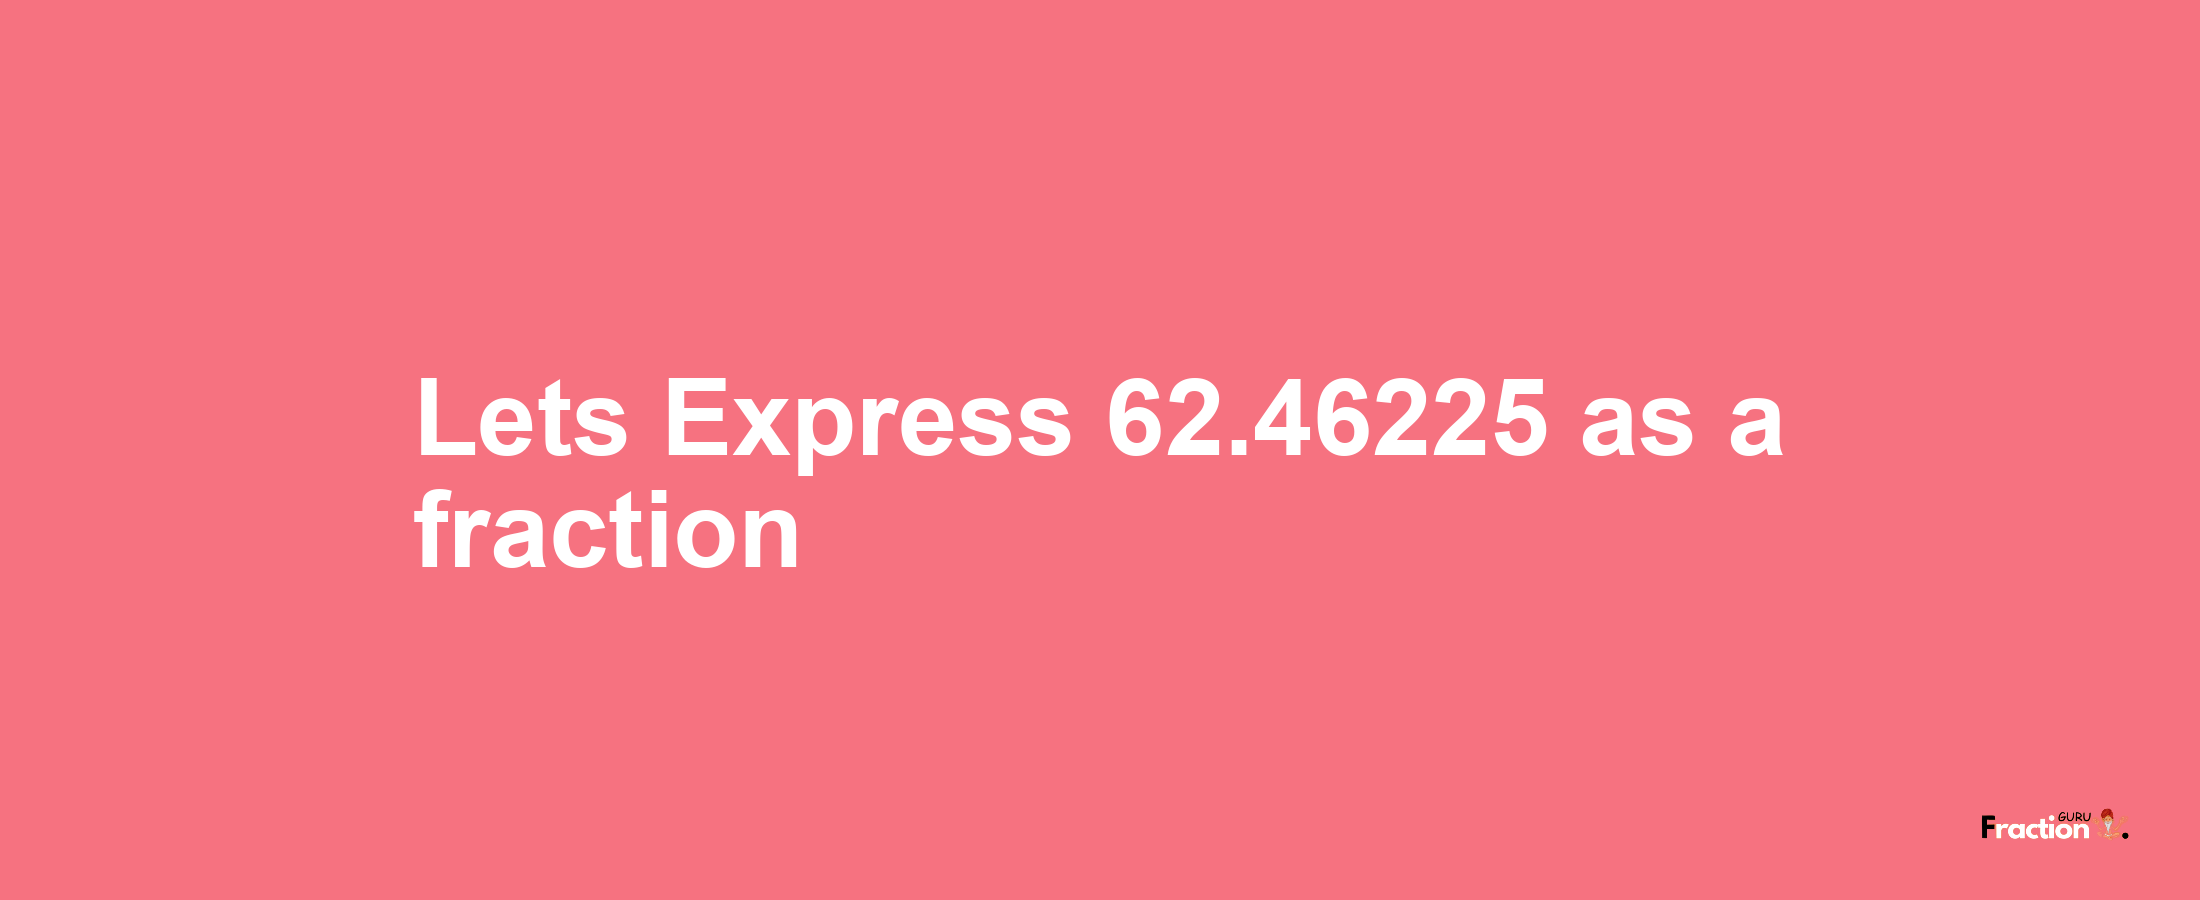 Lets Express 62.46225 as afraction